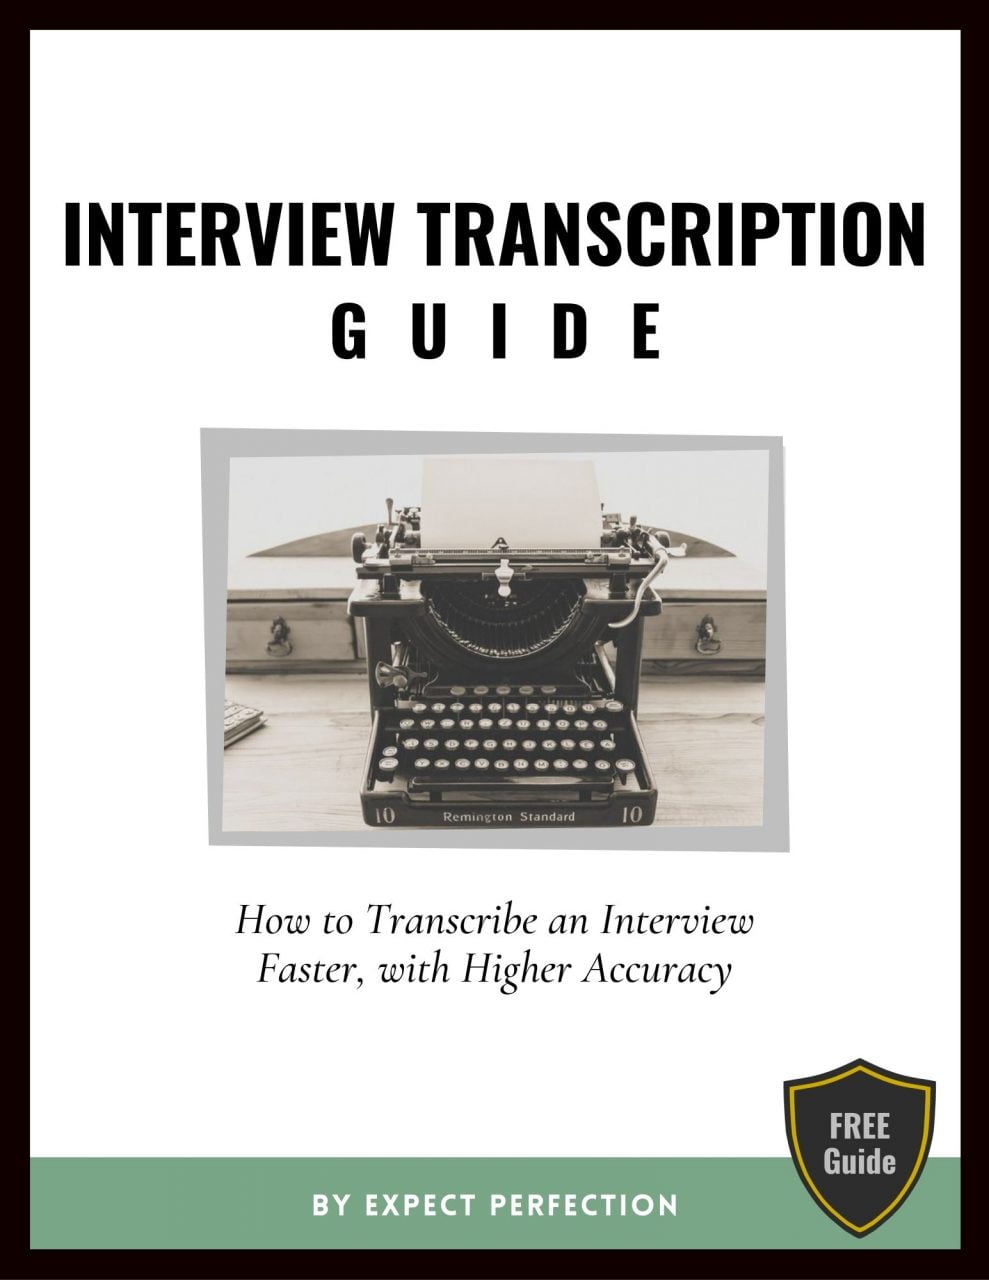 Interview Transcription Guide, by Expect Perfection